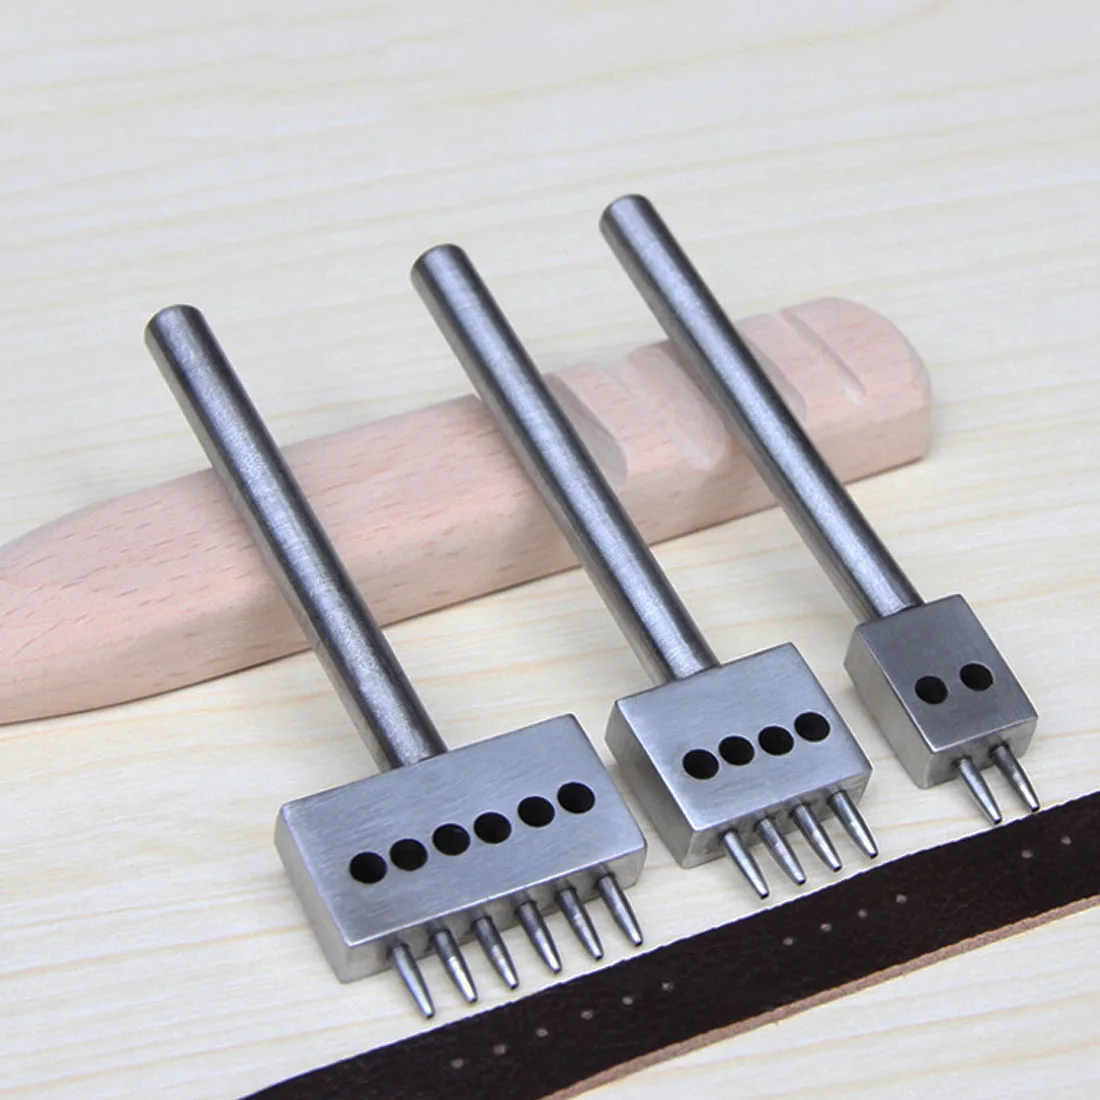 Round Row Punch Drilling Tools 2/4/6 Prong Leather Craft Hole 4mm Leather Spacing Hole Tool 1mm Hole Diameter Punch Tools